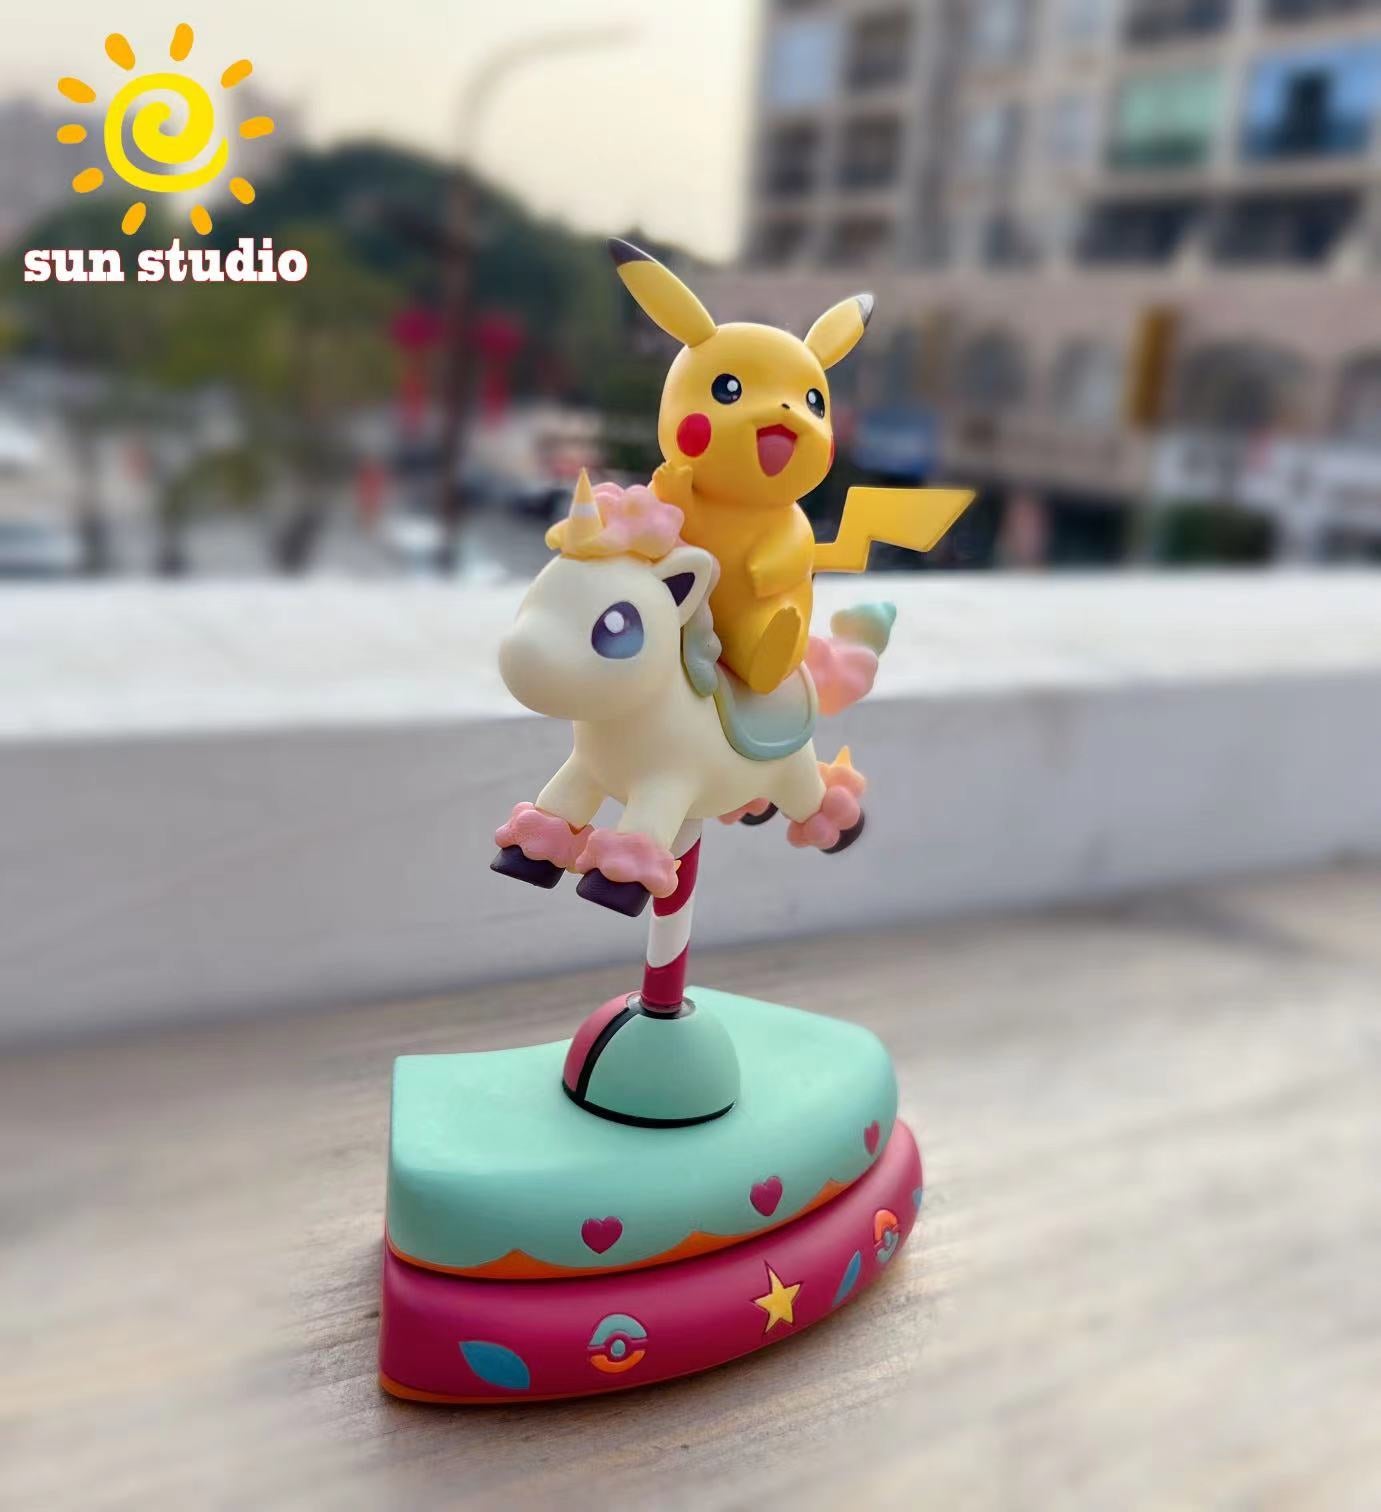 〖Sold Out〗Pokémon Peripheral Products Carousel series 01 Pikachu - SUN Studio